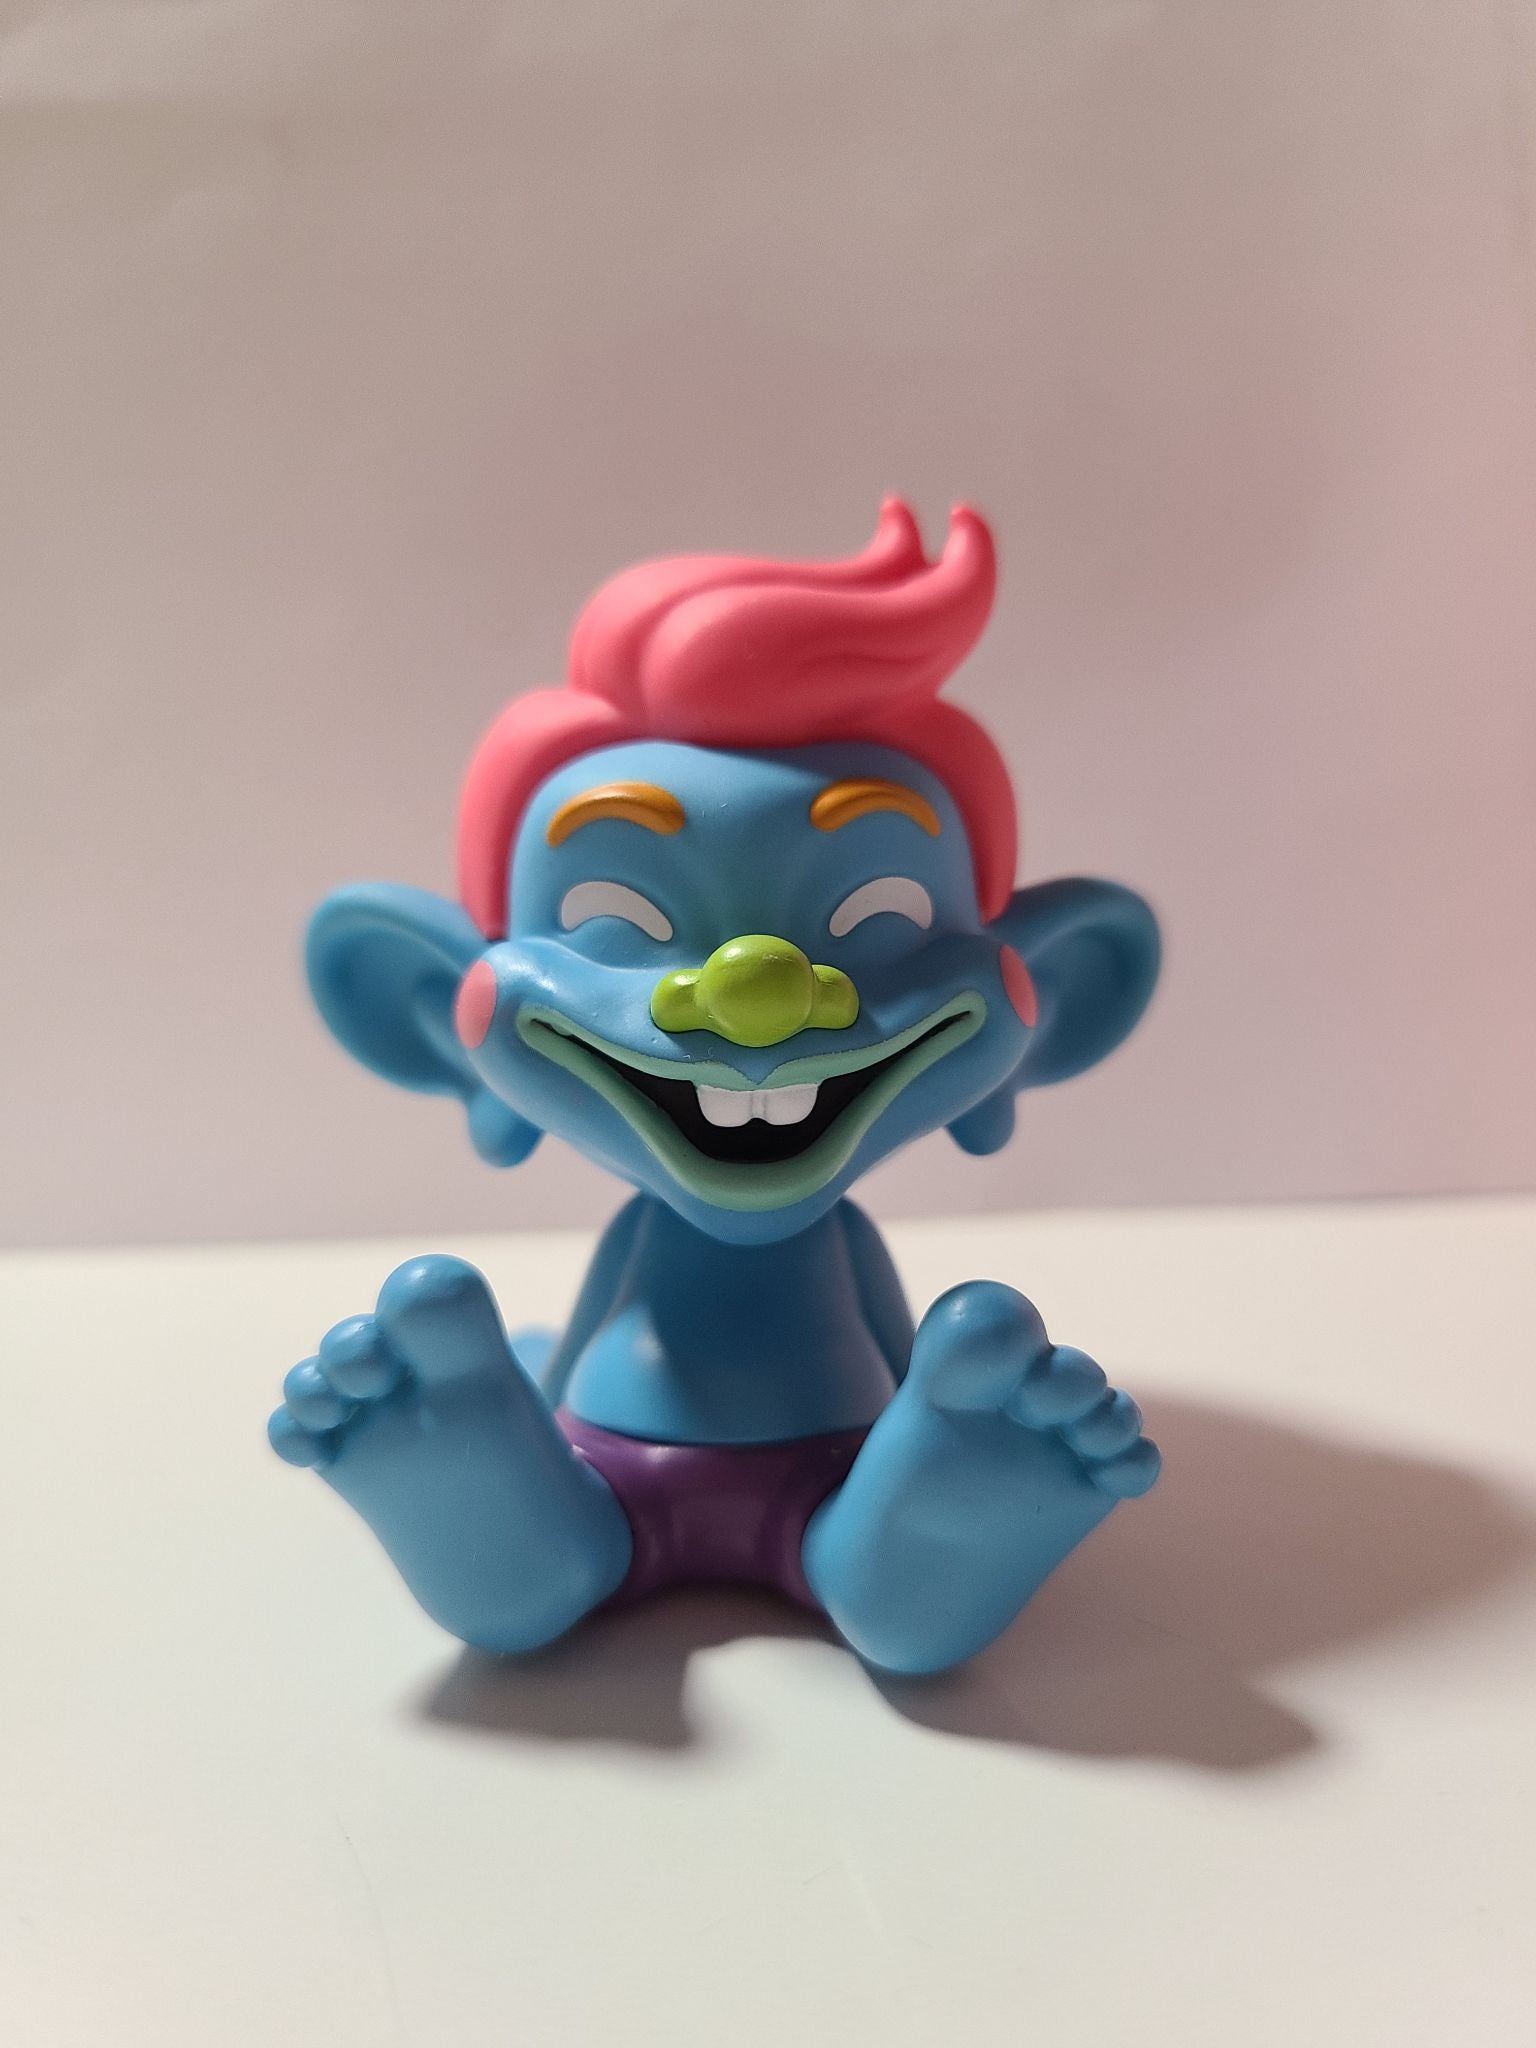 Smudge Baby - Unbox & Friends Wave 3 by Unbox Industries  - 1